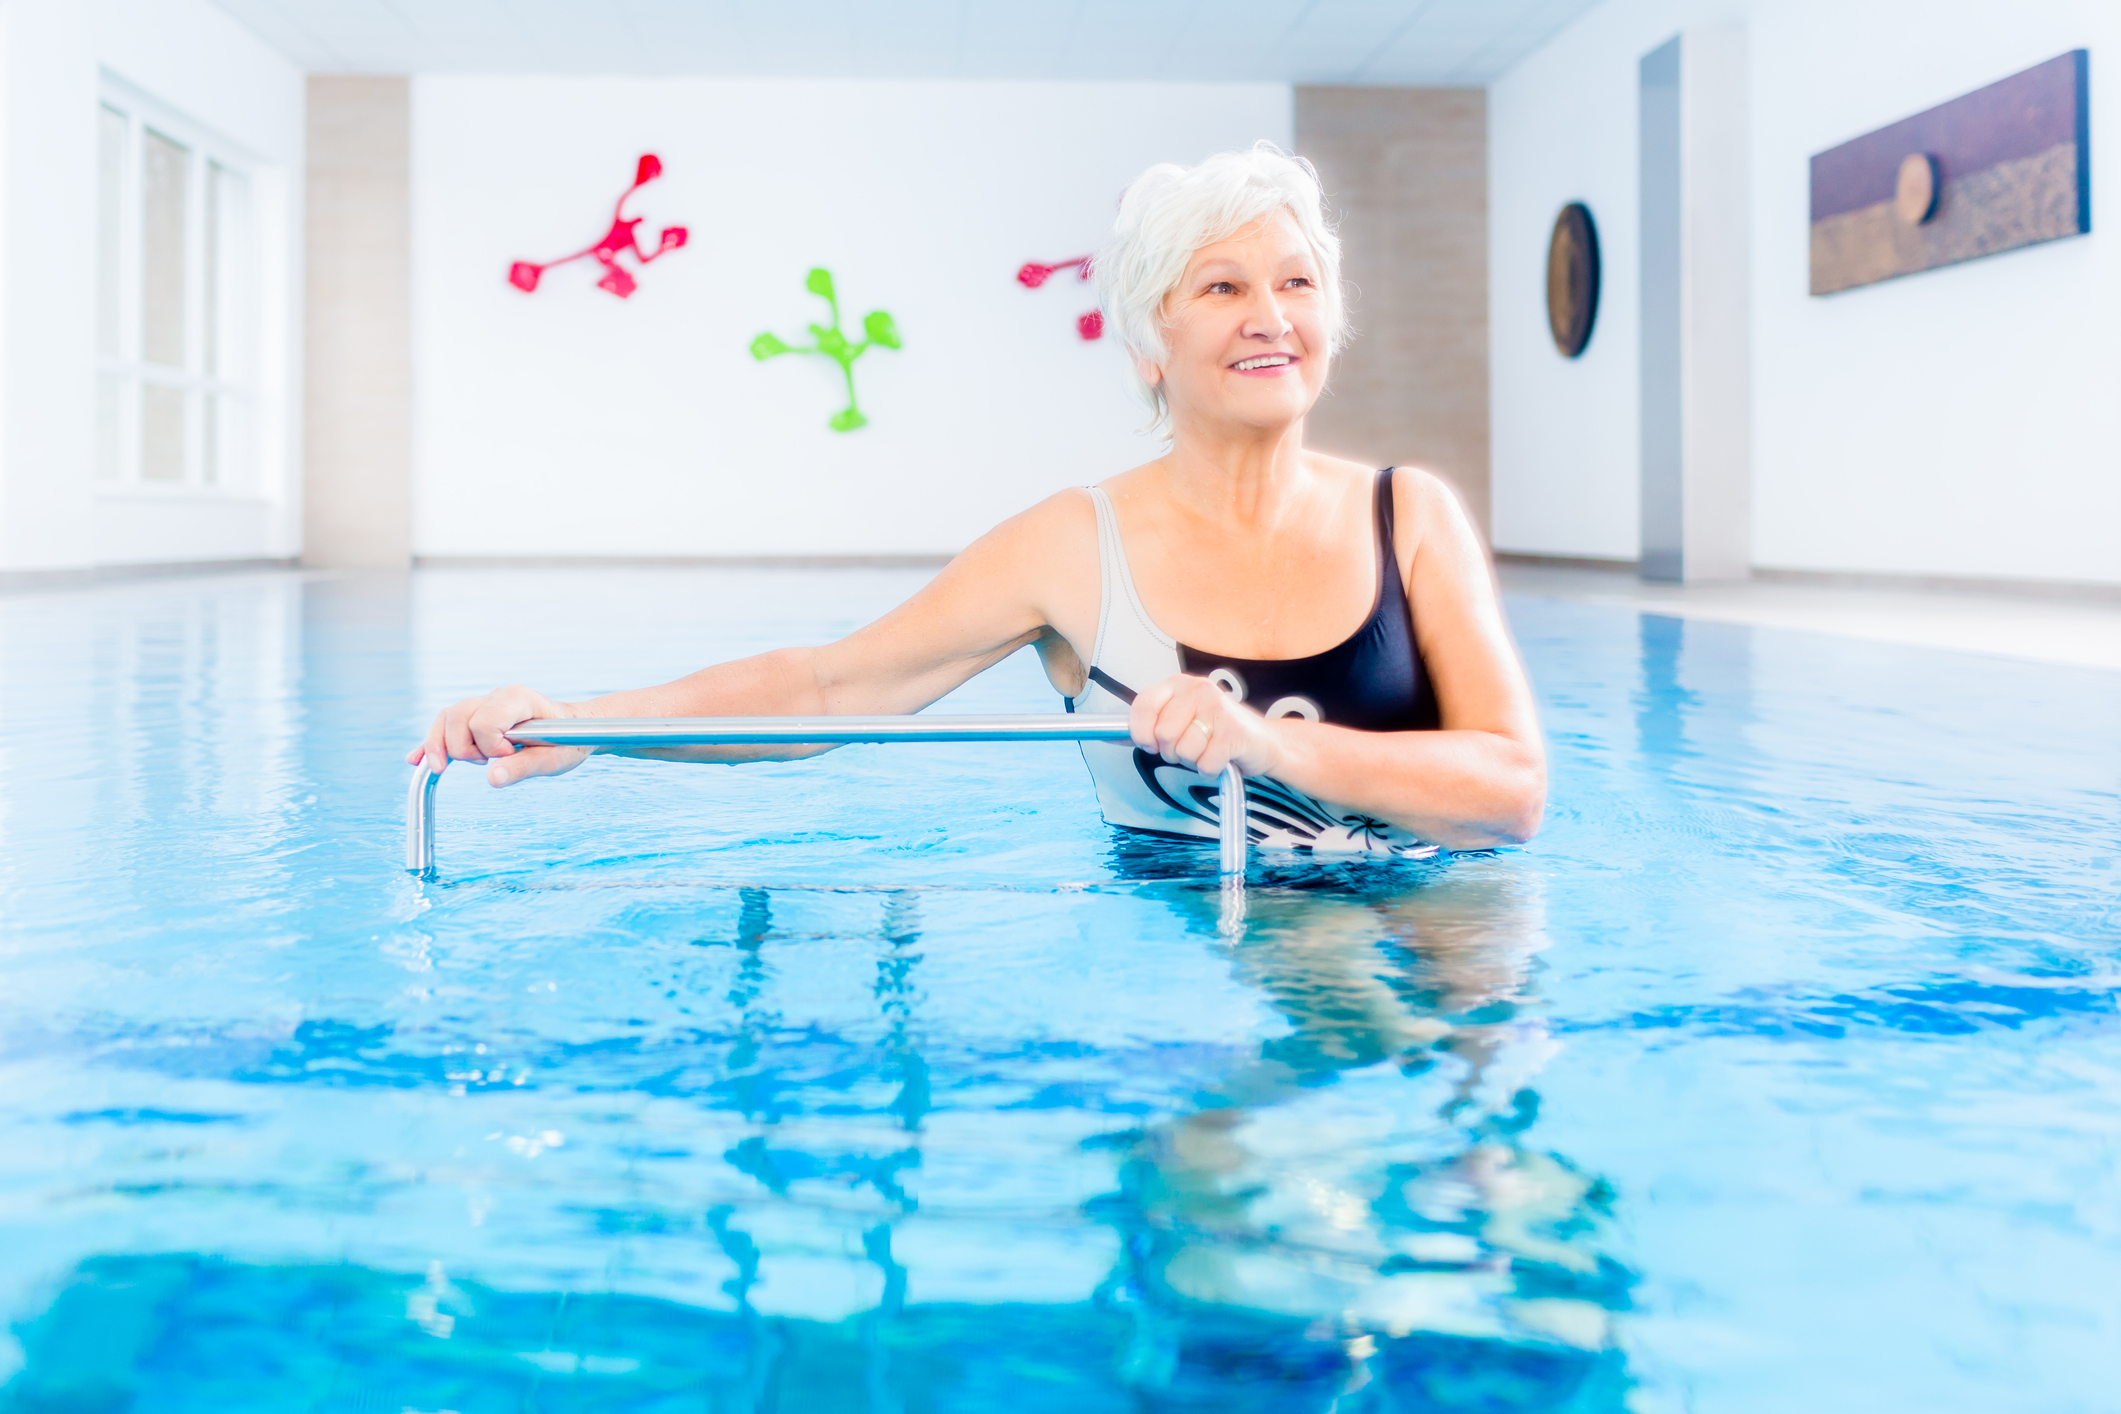 The Benefits of Aquatic Therapy for Arthritis - BenchMark Physical